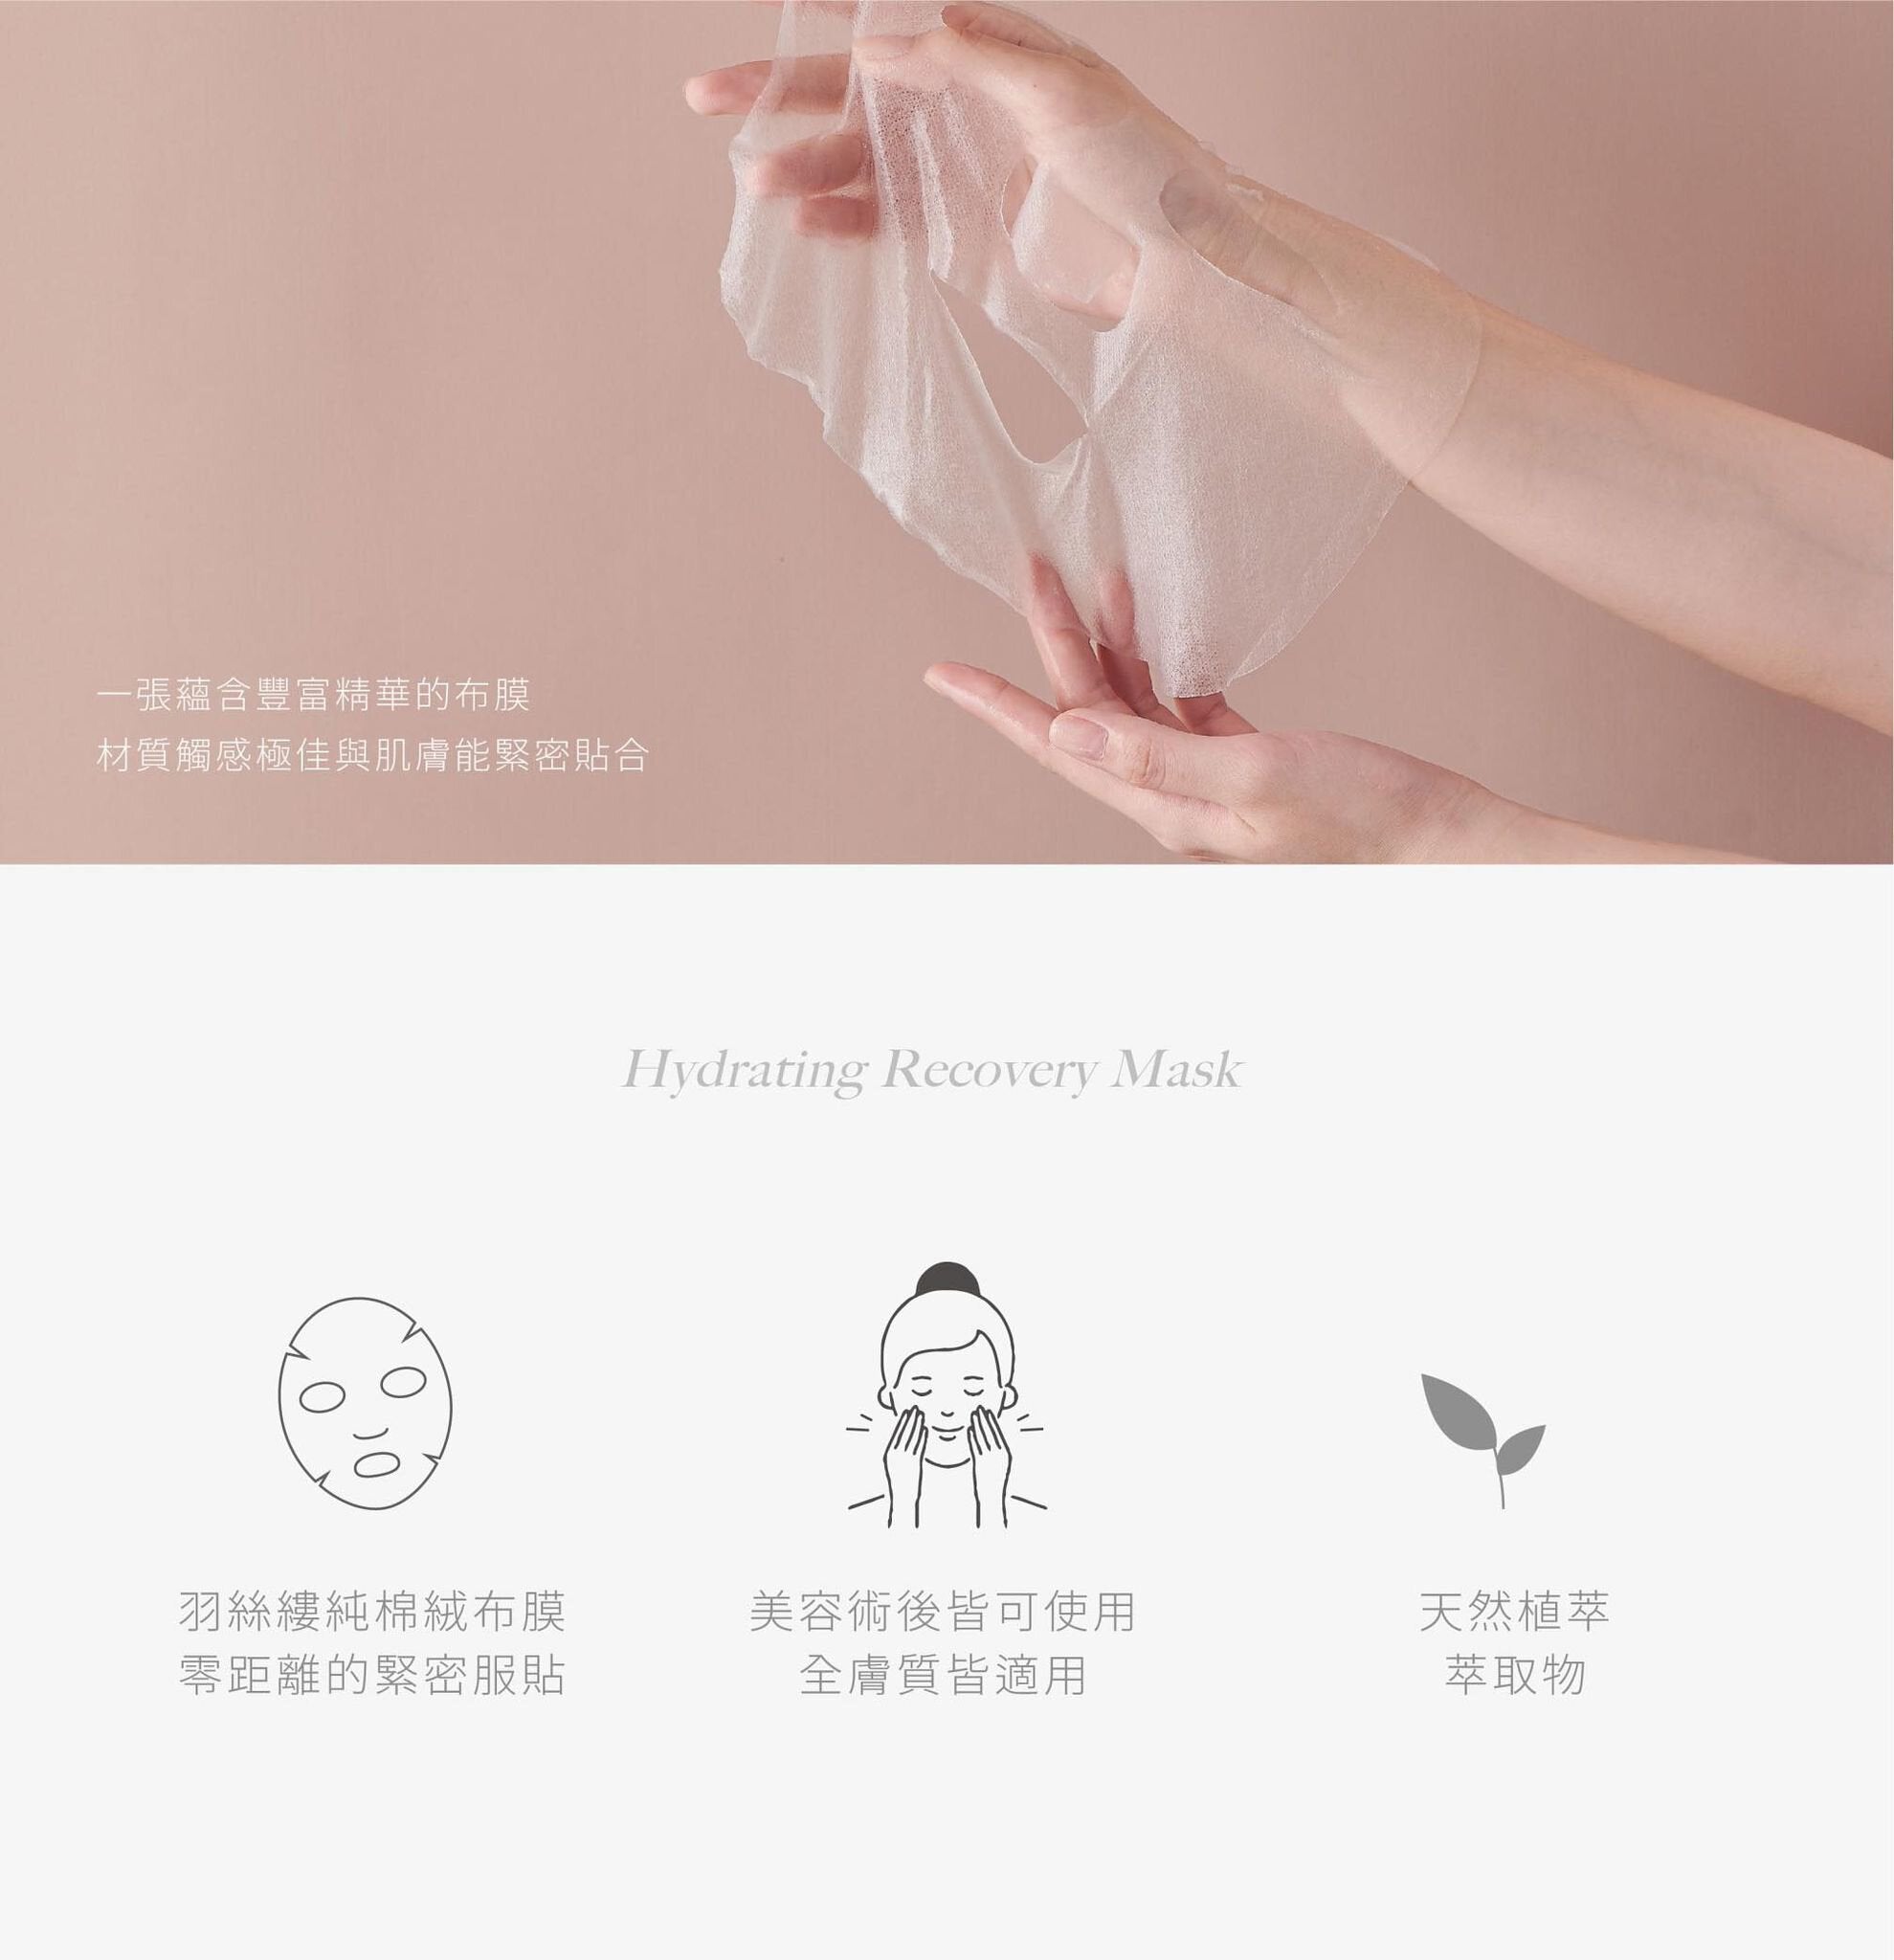 HYDRATING RECOVERY MASK